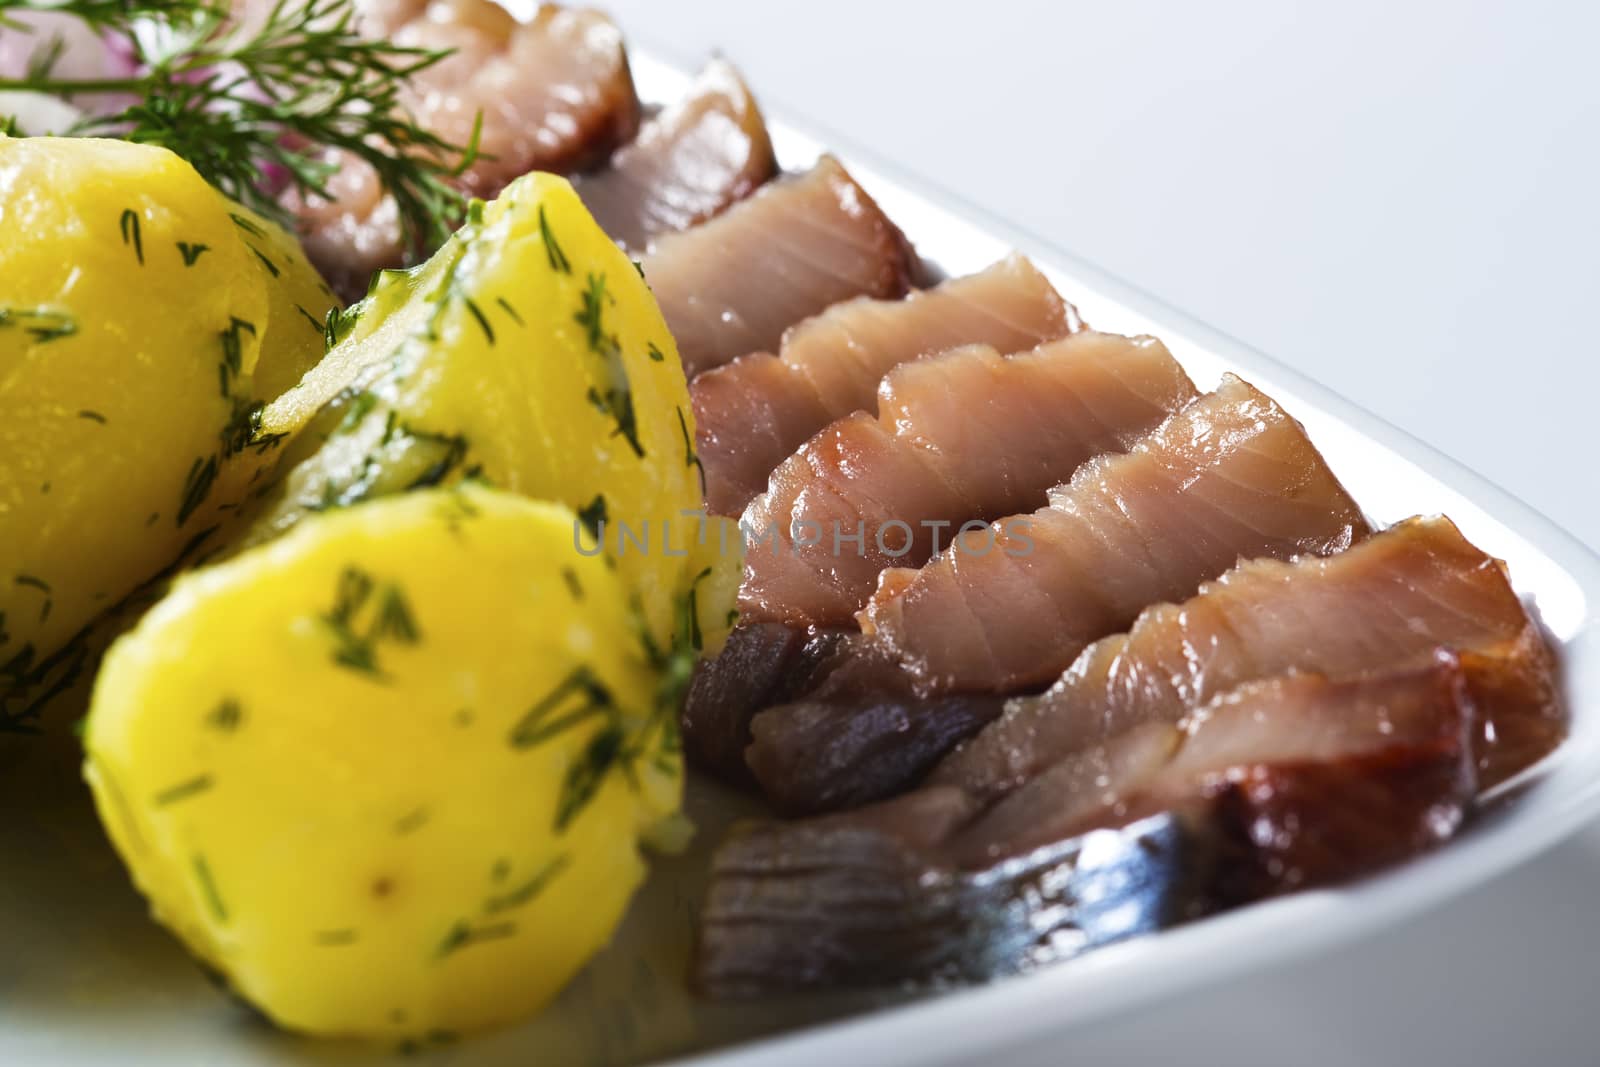 Herring fish slices with potatoes on the plate